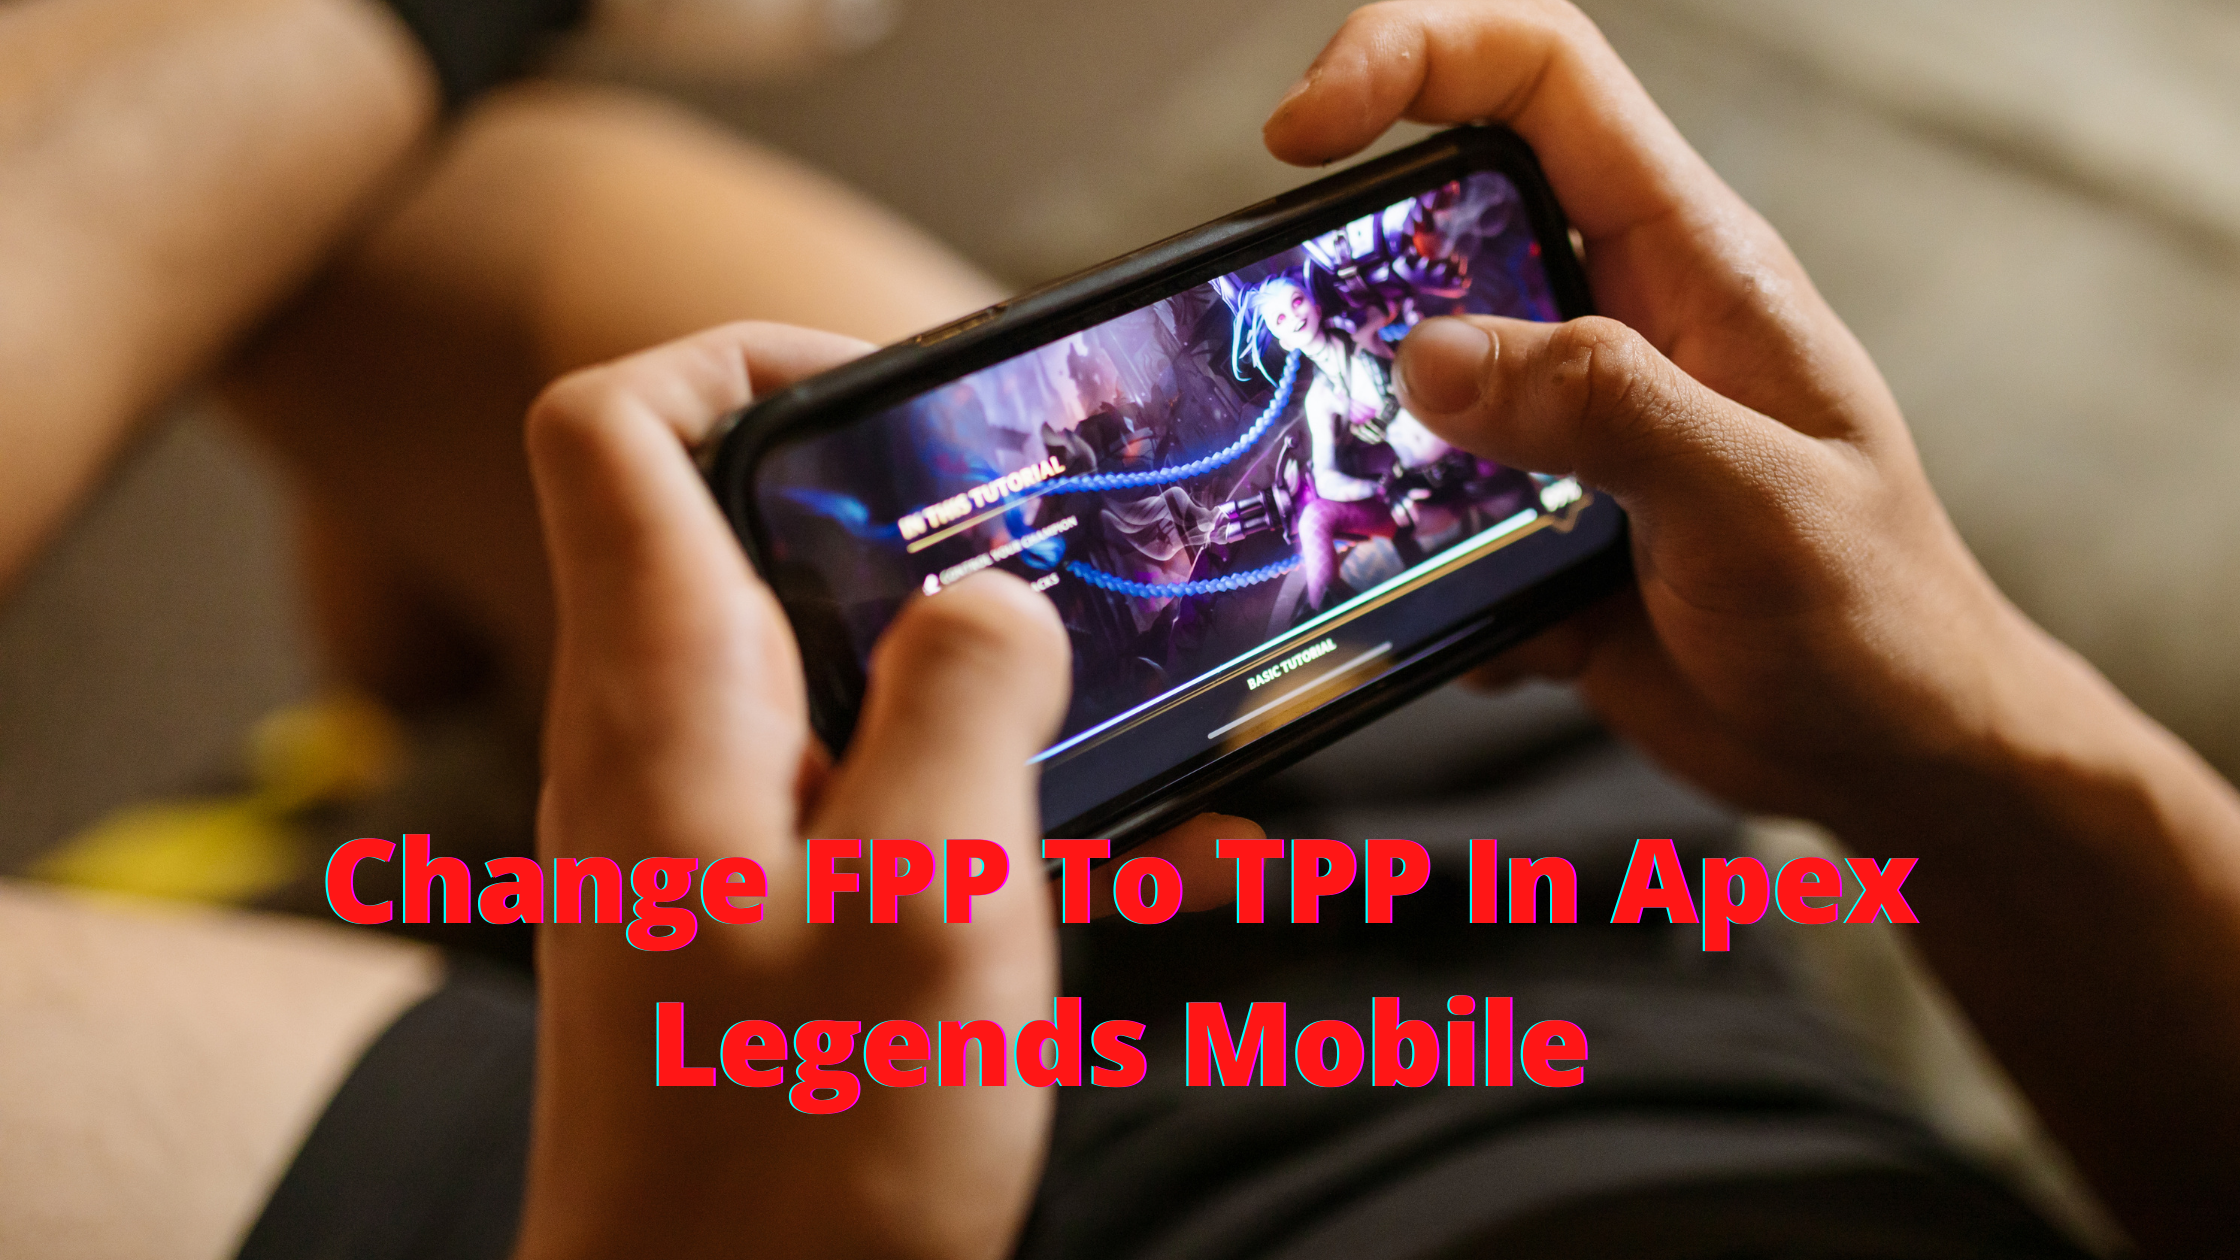 How To Change FPP To TPP In Apex Legends Mobile